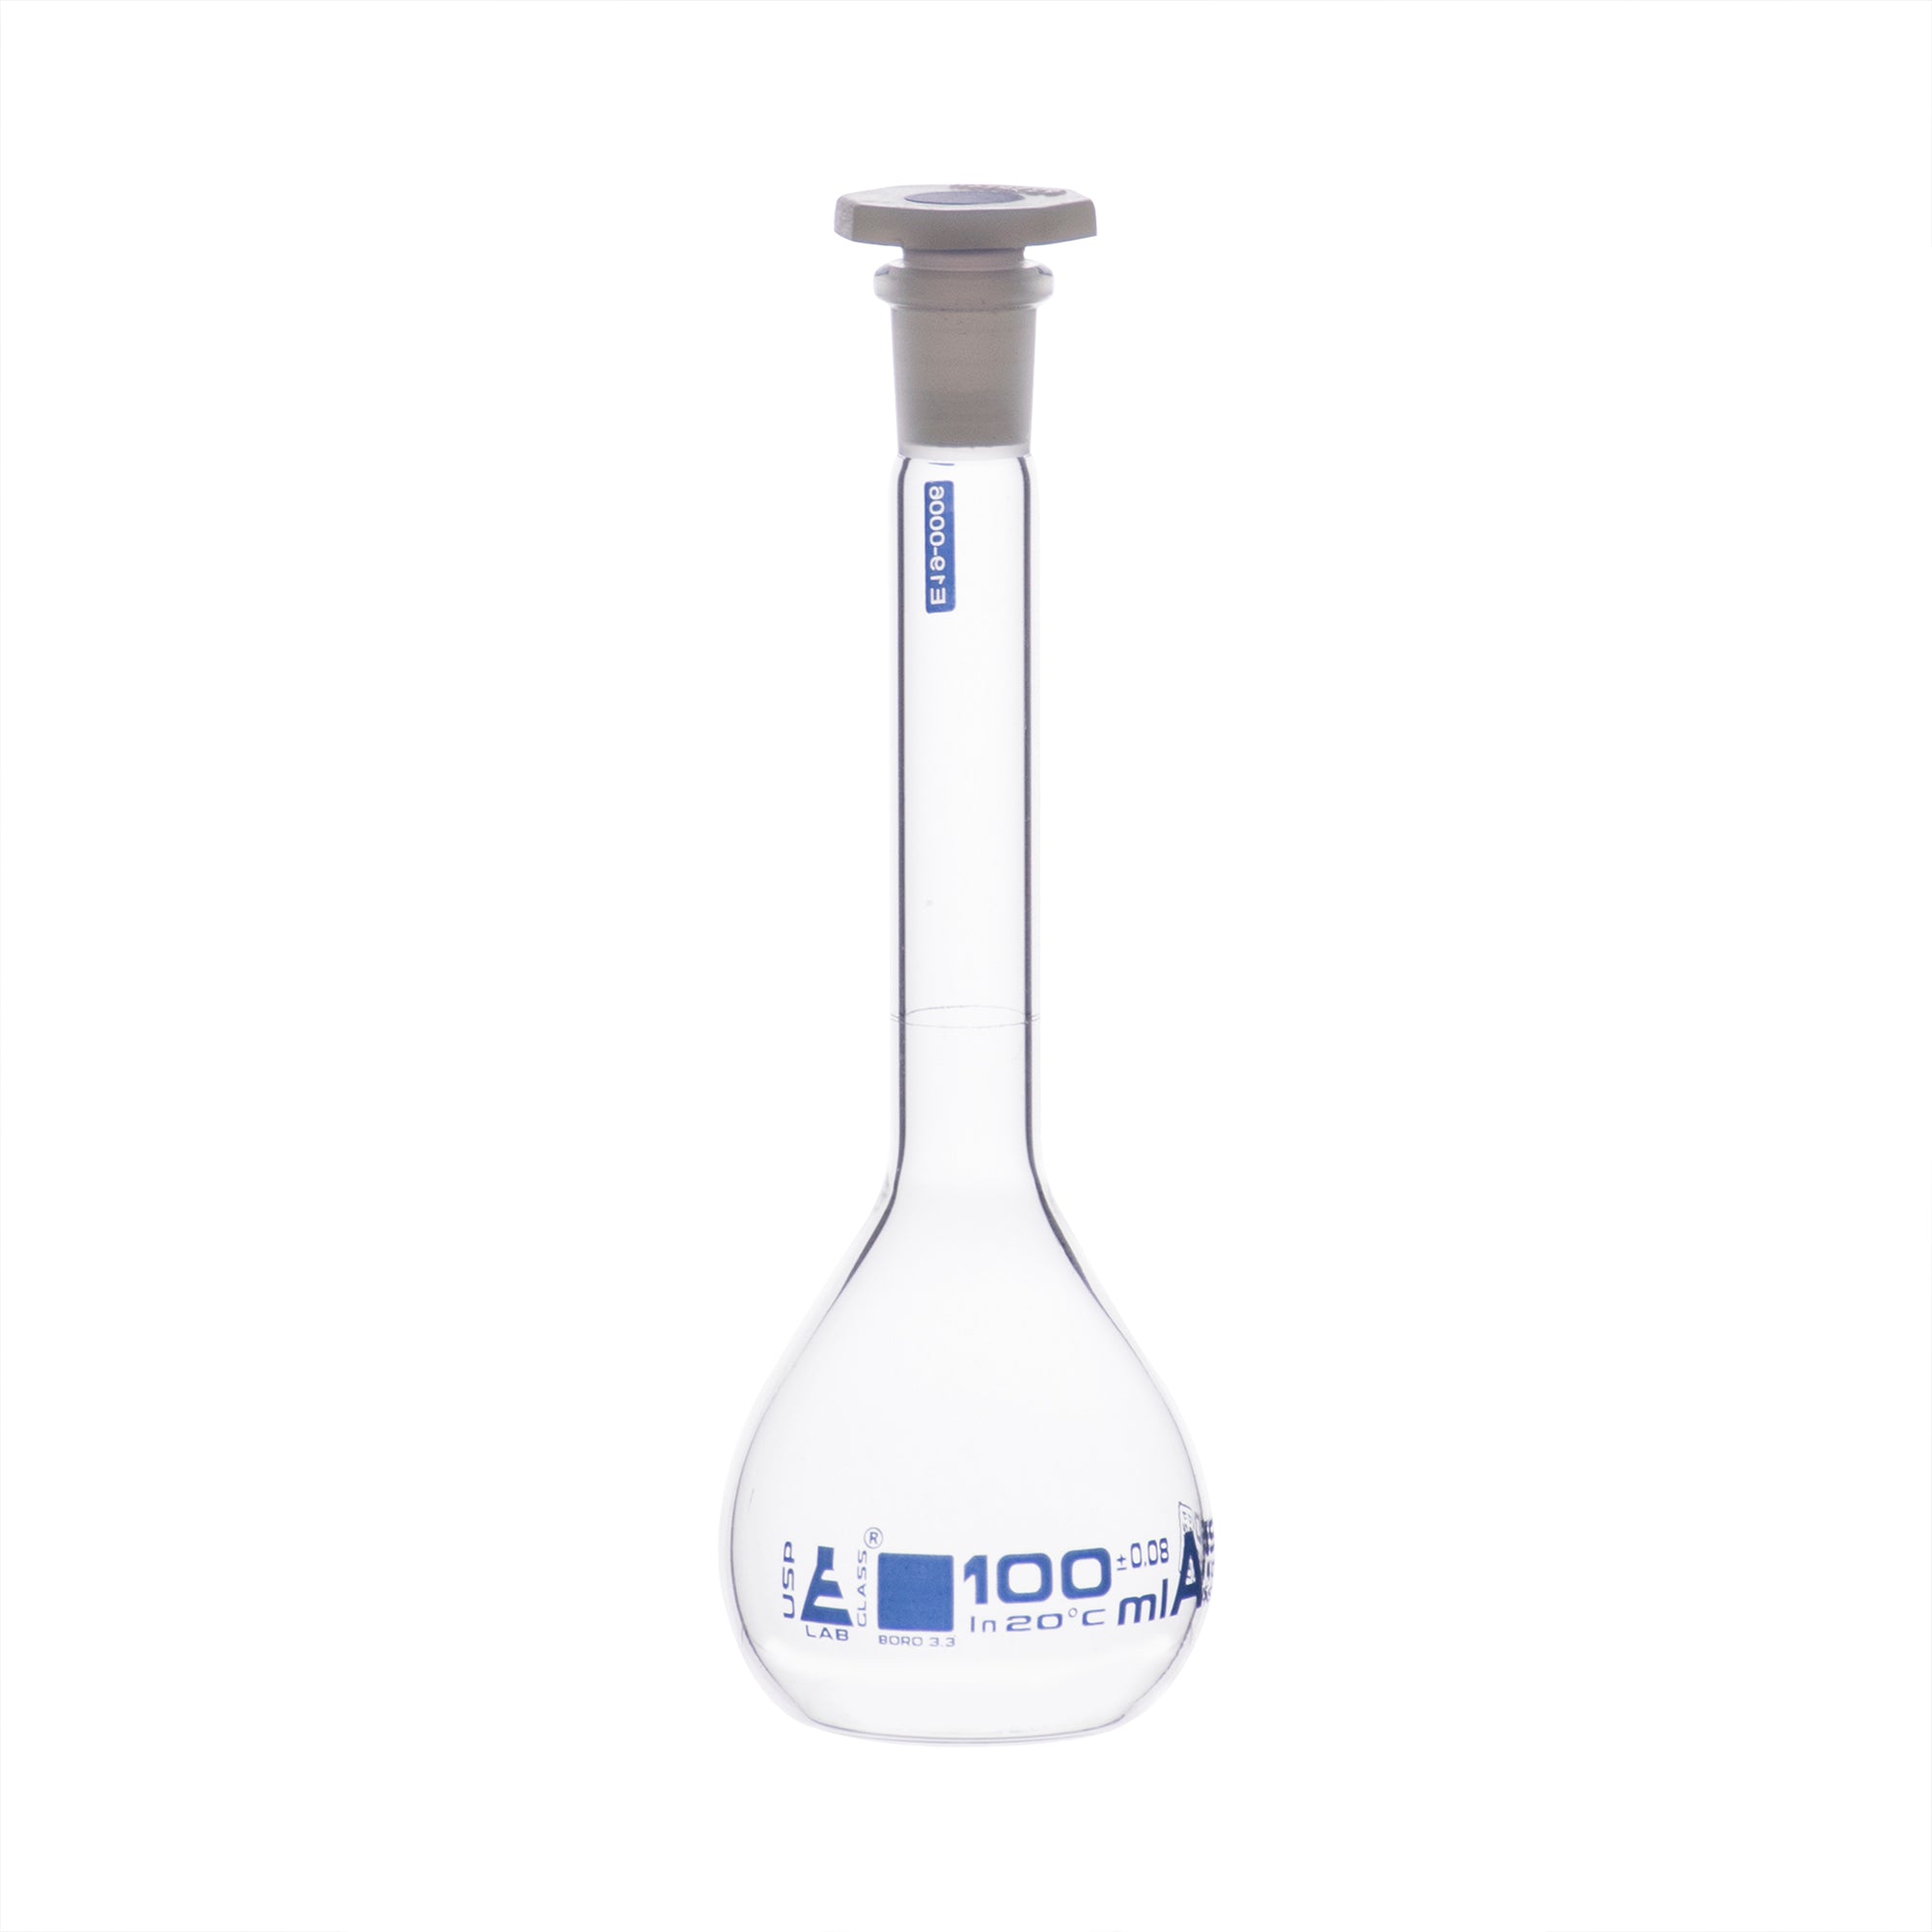 Borosilicate Glass Volumetric Flask with Solid Glass Stopper, 100 ml, USP Class A with Individual Work Certificate,  Pack of 2, Autoclavable